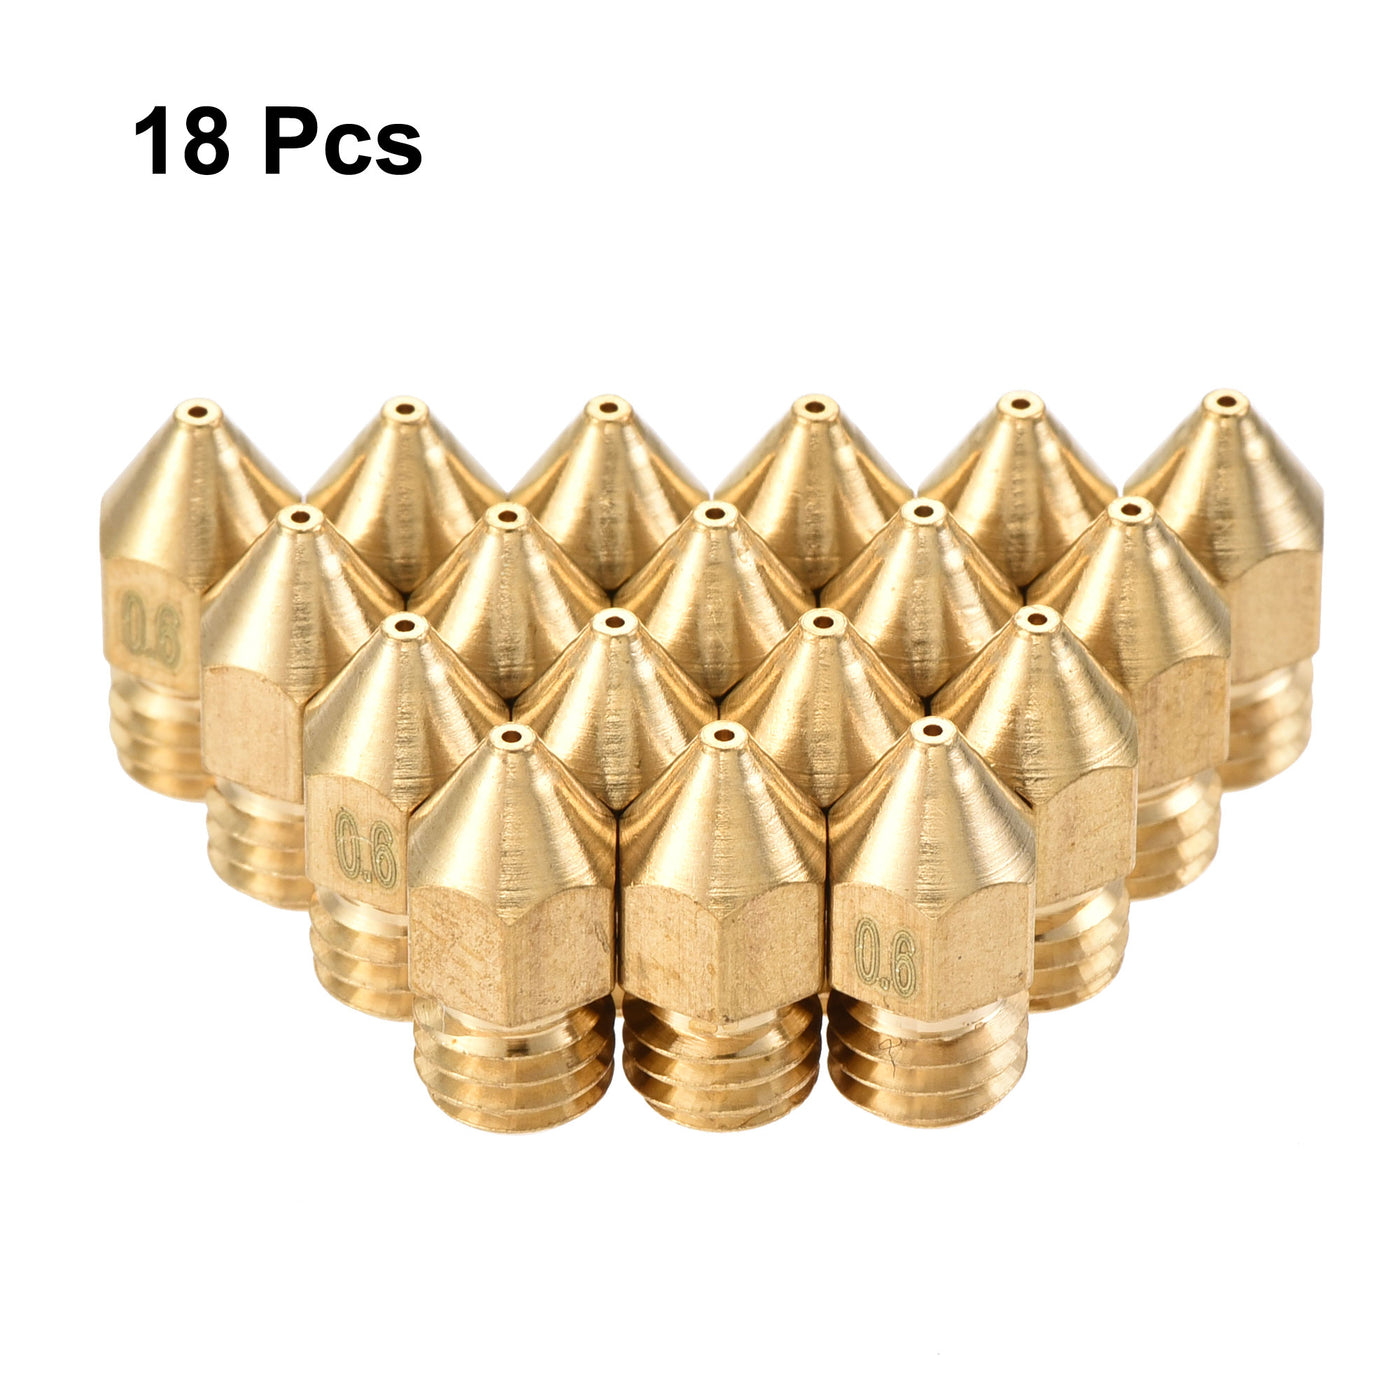 uxcell Uxcell 0.6mm 3D Printer Nozzle, 18pcs M6 Thread for MK8 1.75mm Extruder Print, Brass